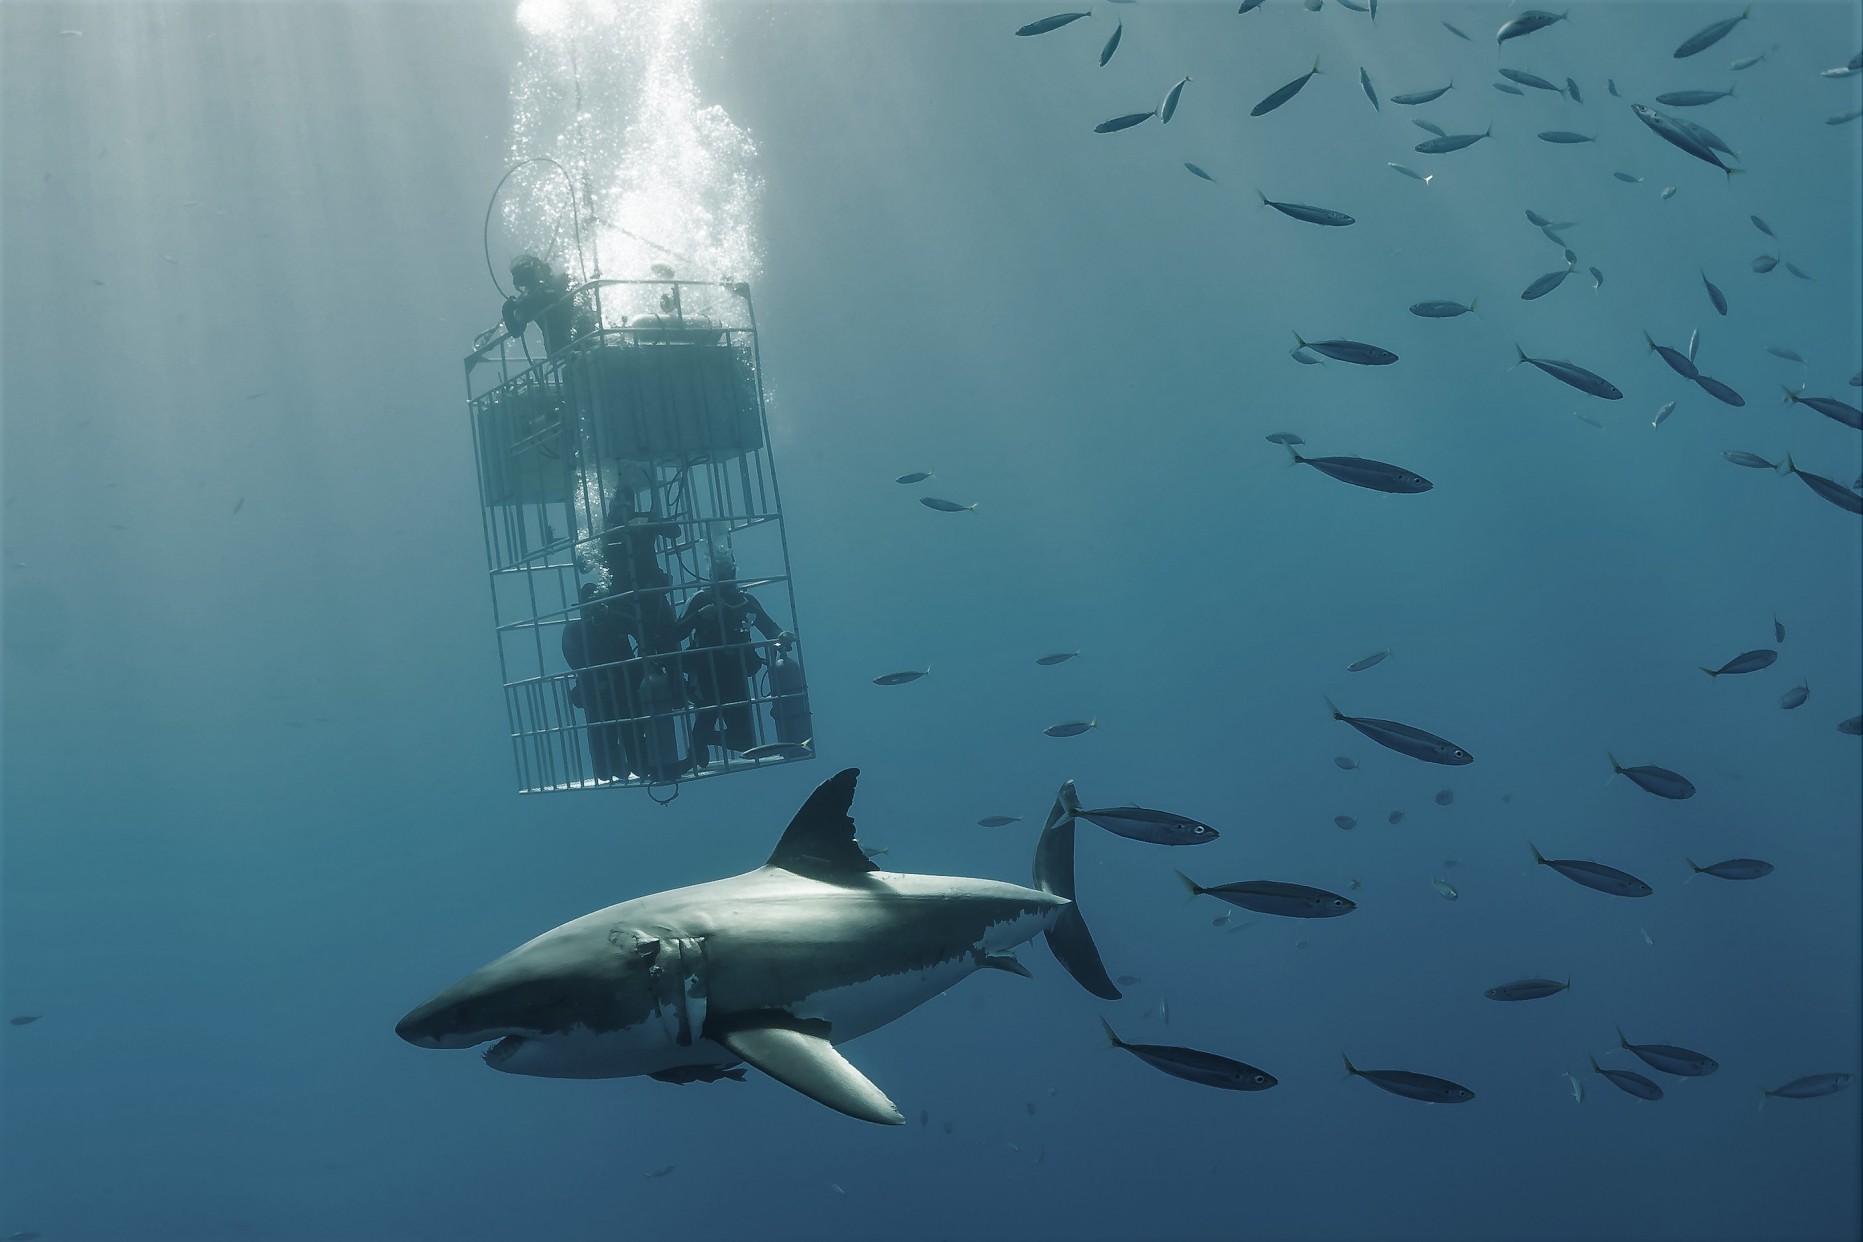 shark cage diving in Baja, Mexico